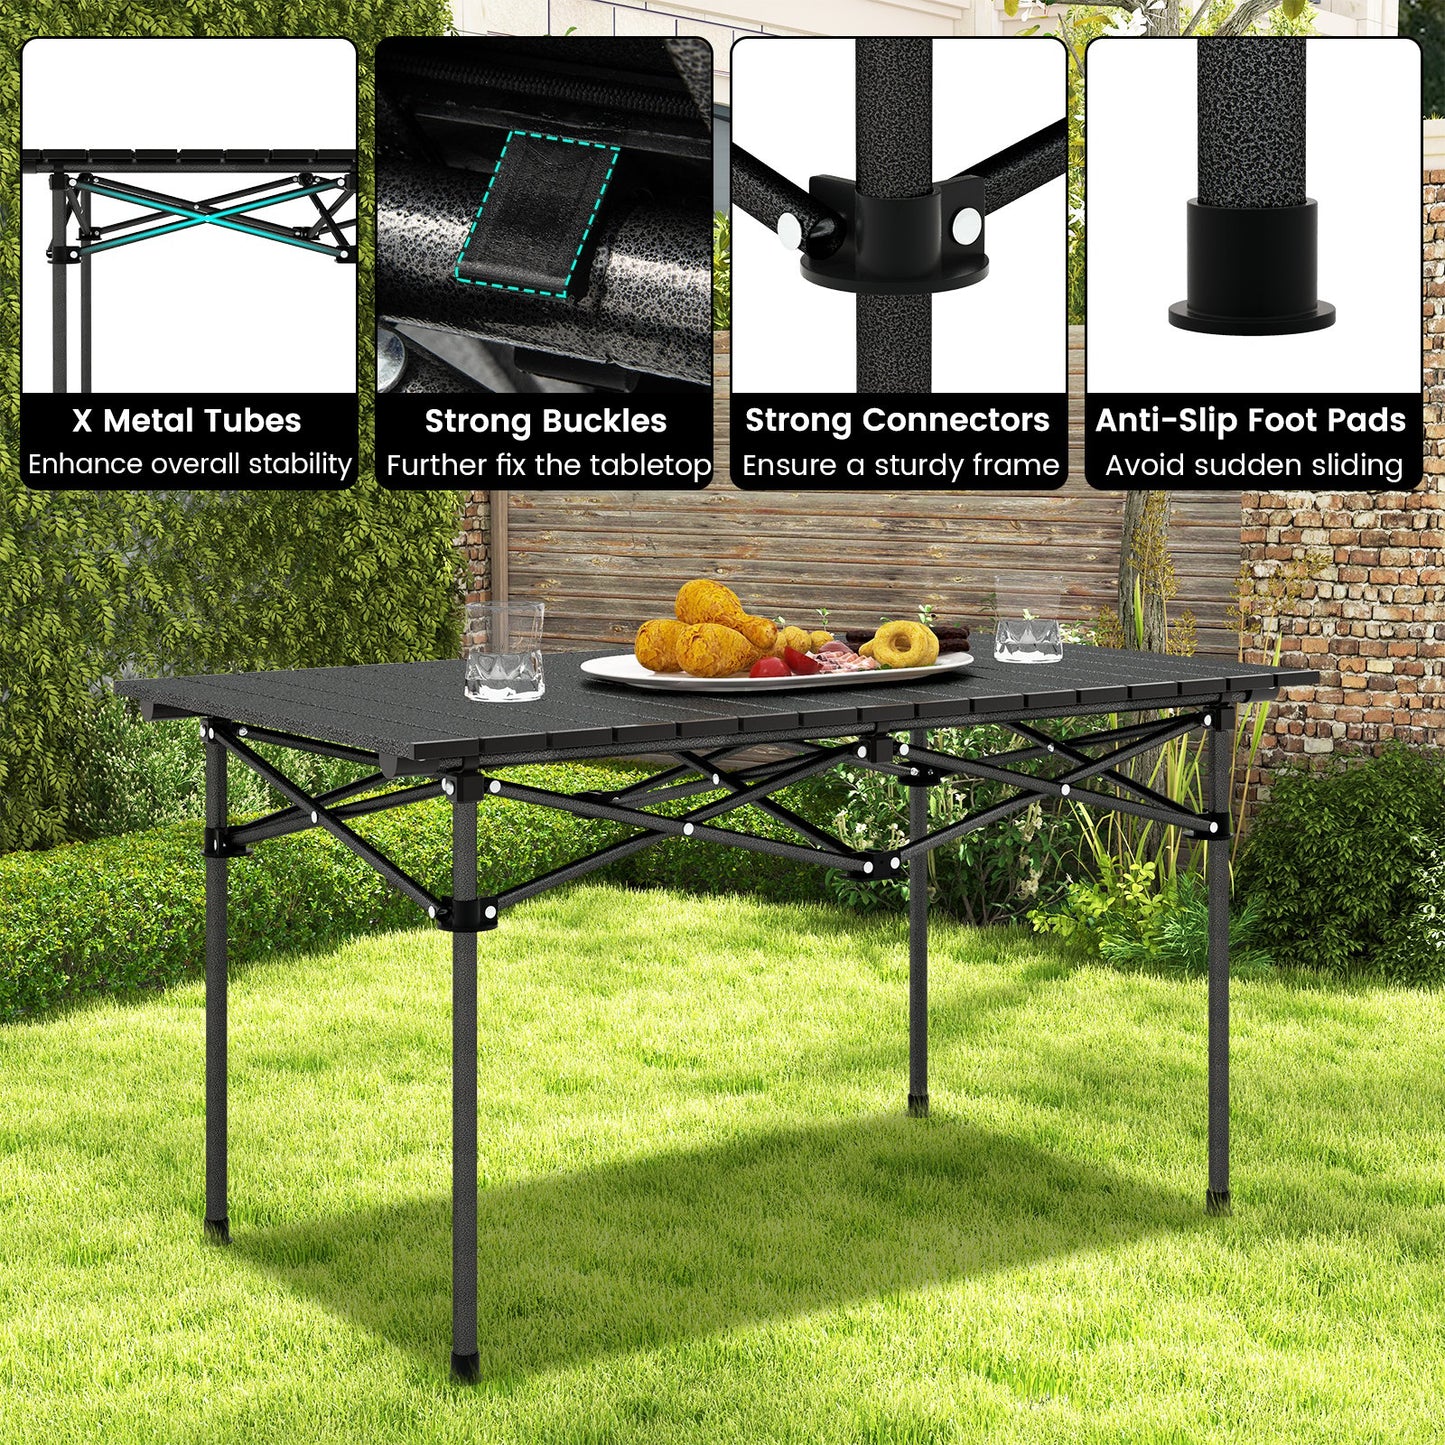 Aluminum Camping Table for 4-6 People with Carry Bag, Black